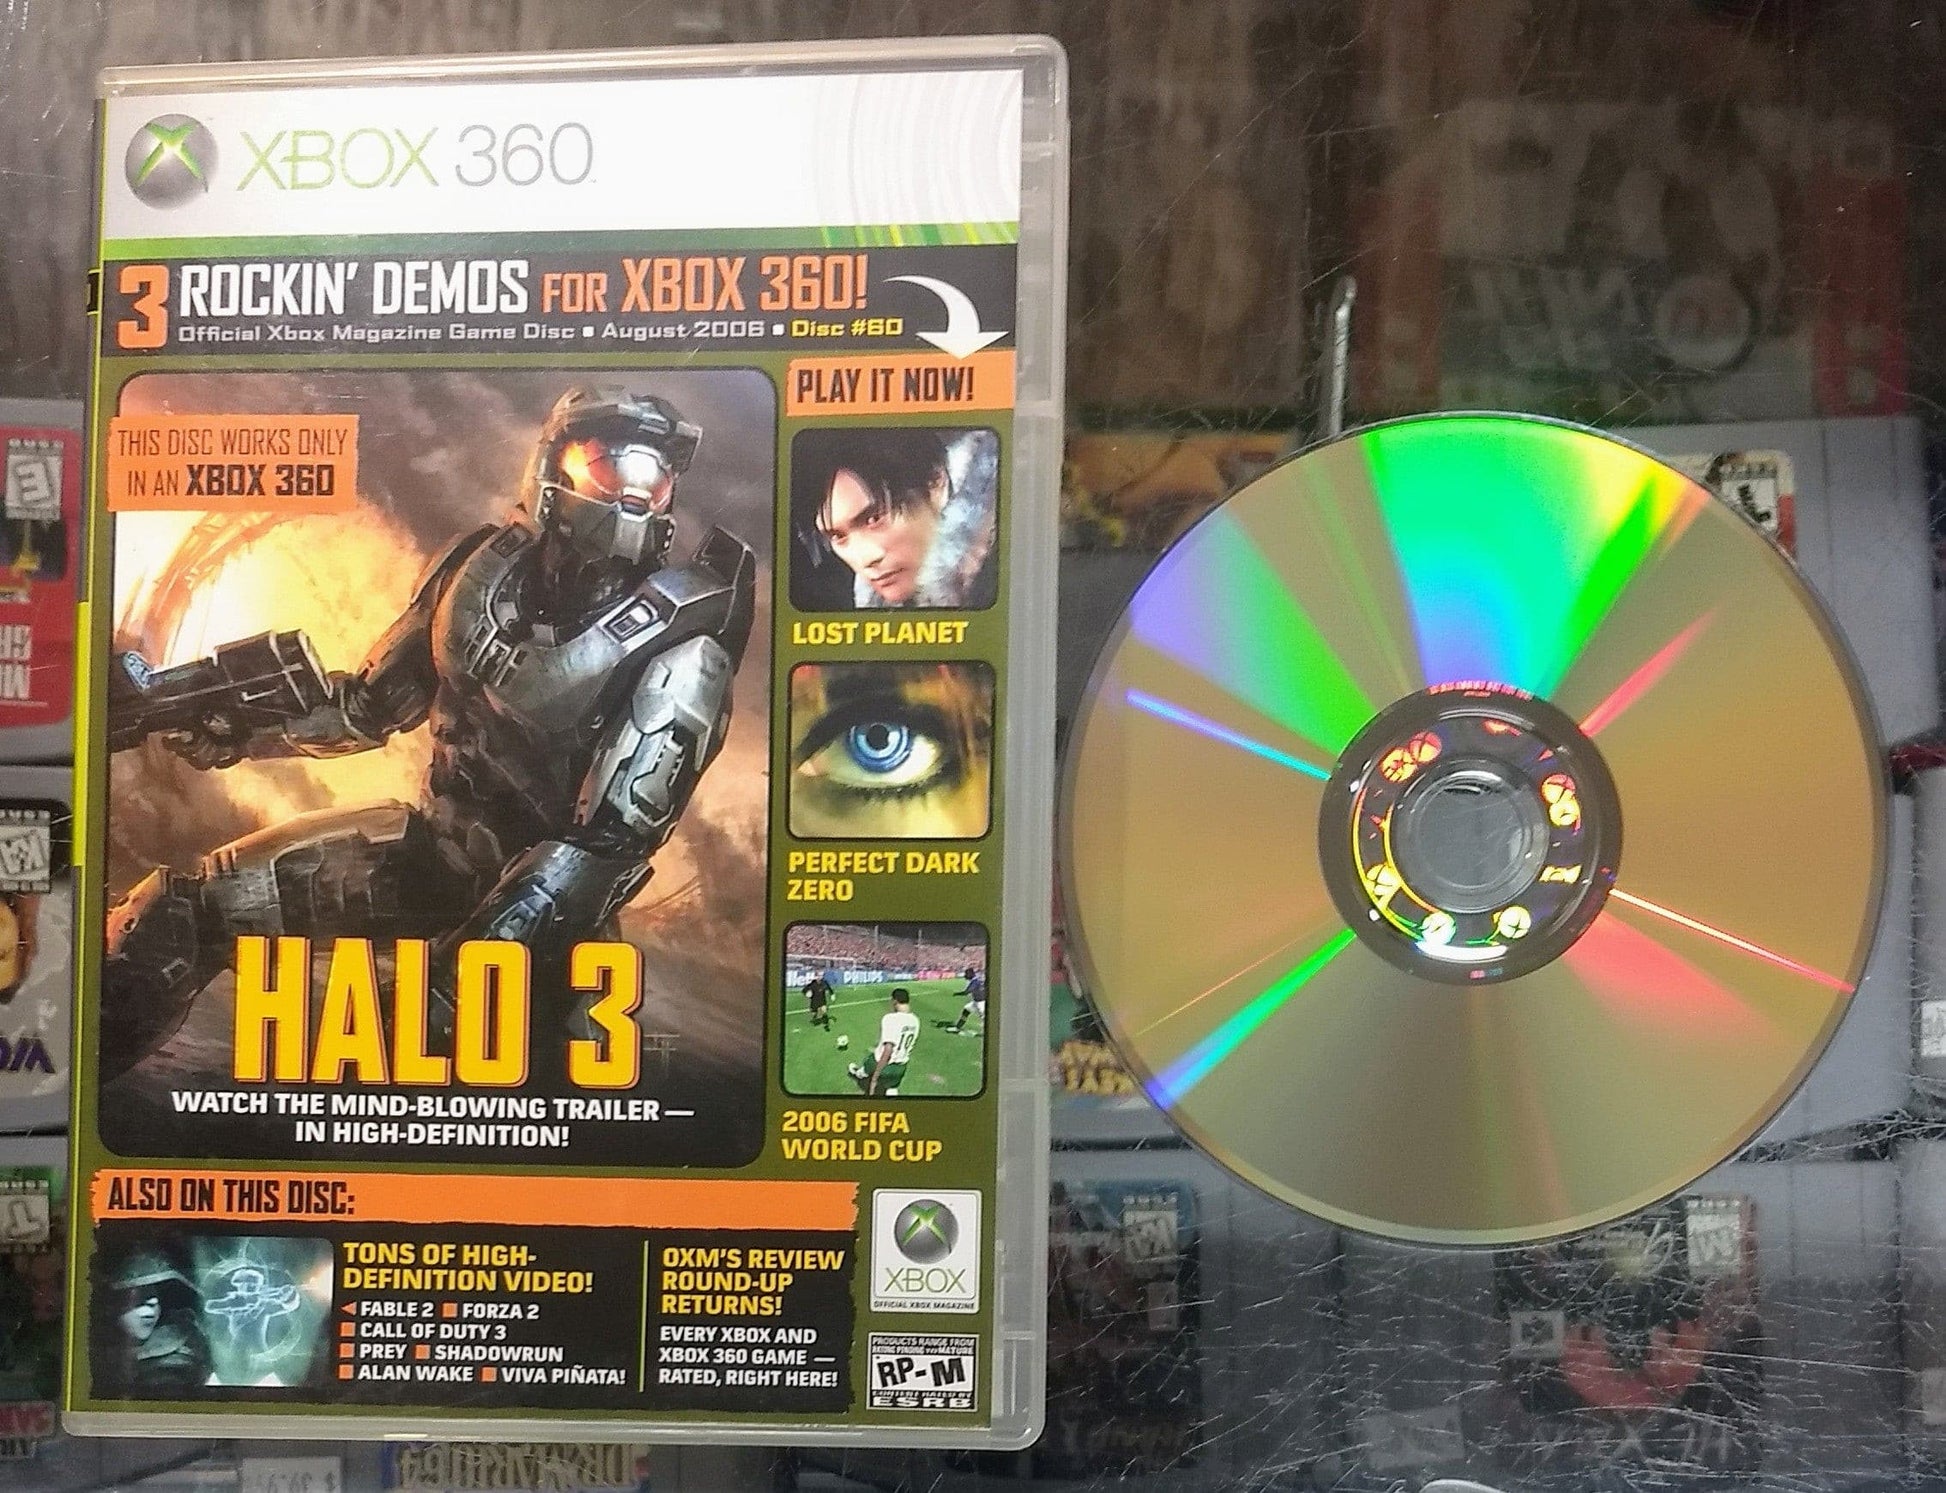 OFFICIAL XBOX MAGAZINE DEMO DISC 60 (XBOX 360 X360) - jeux video game-x